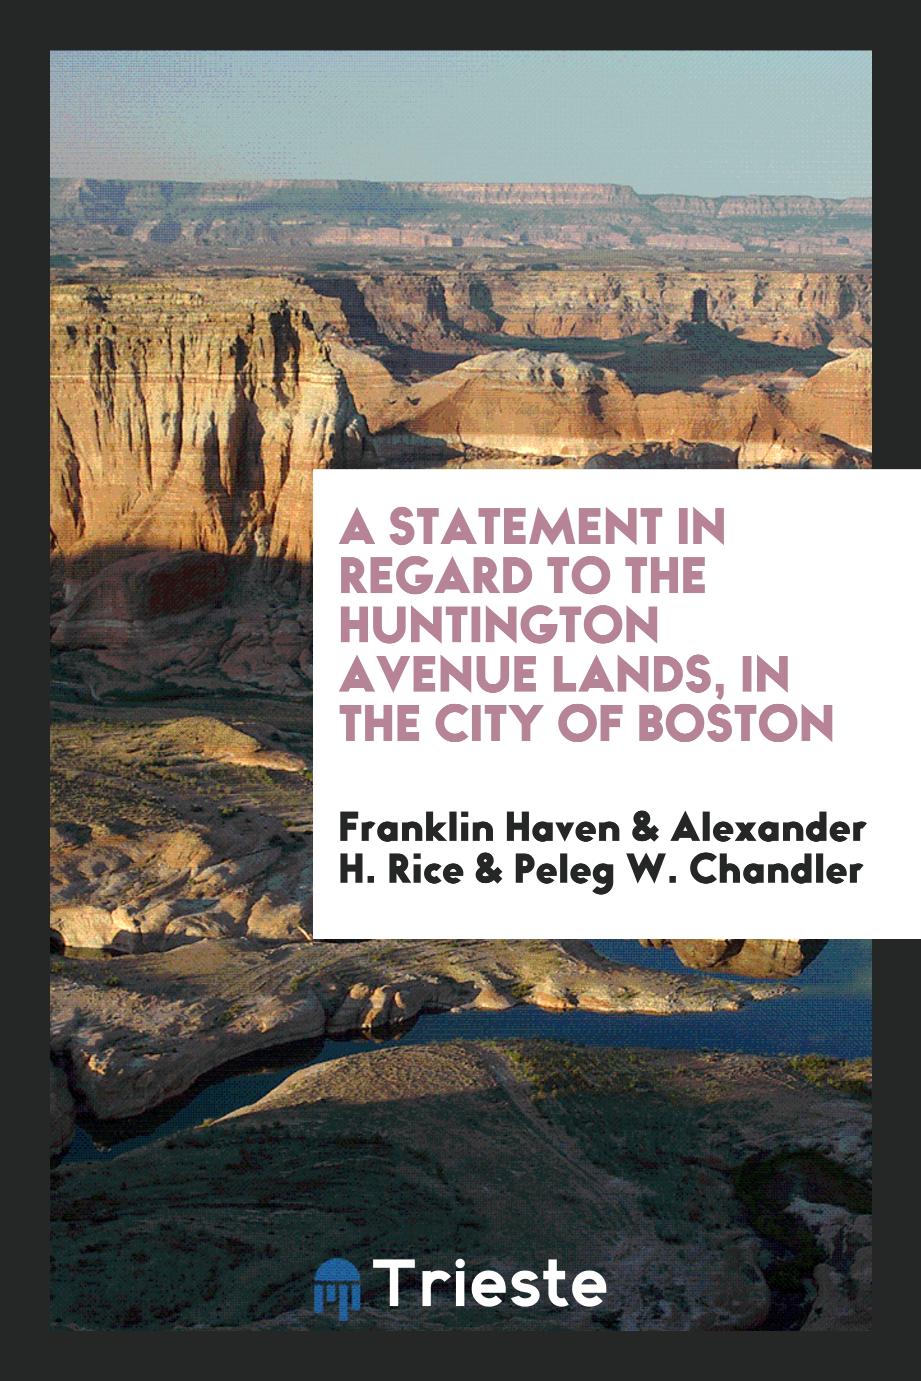 A Statement in Regard to the Huntington Avenue Lands, in the City of Boston